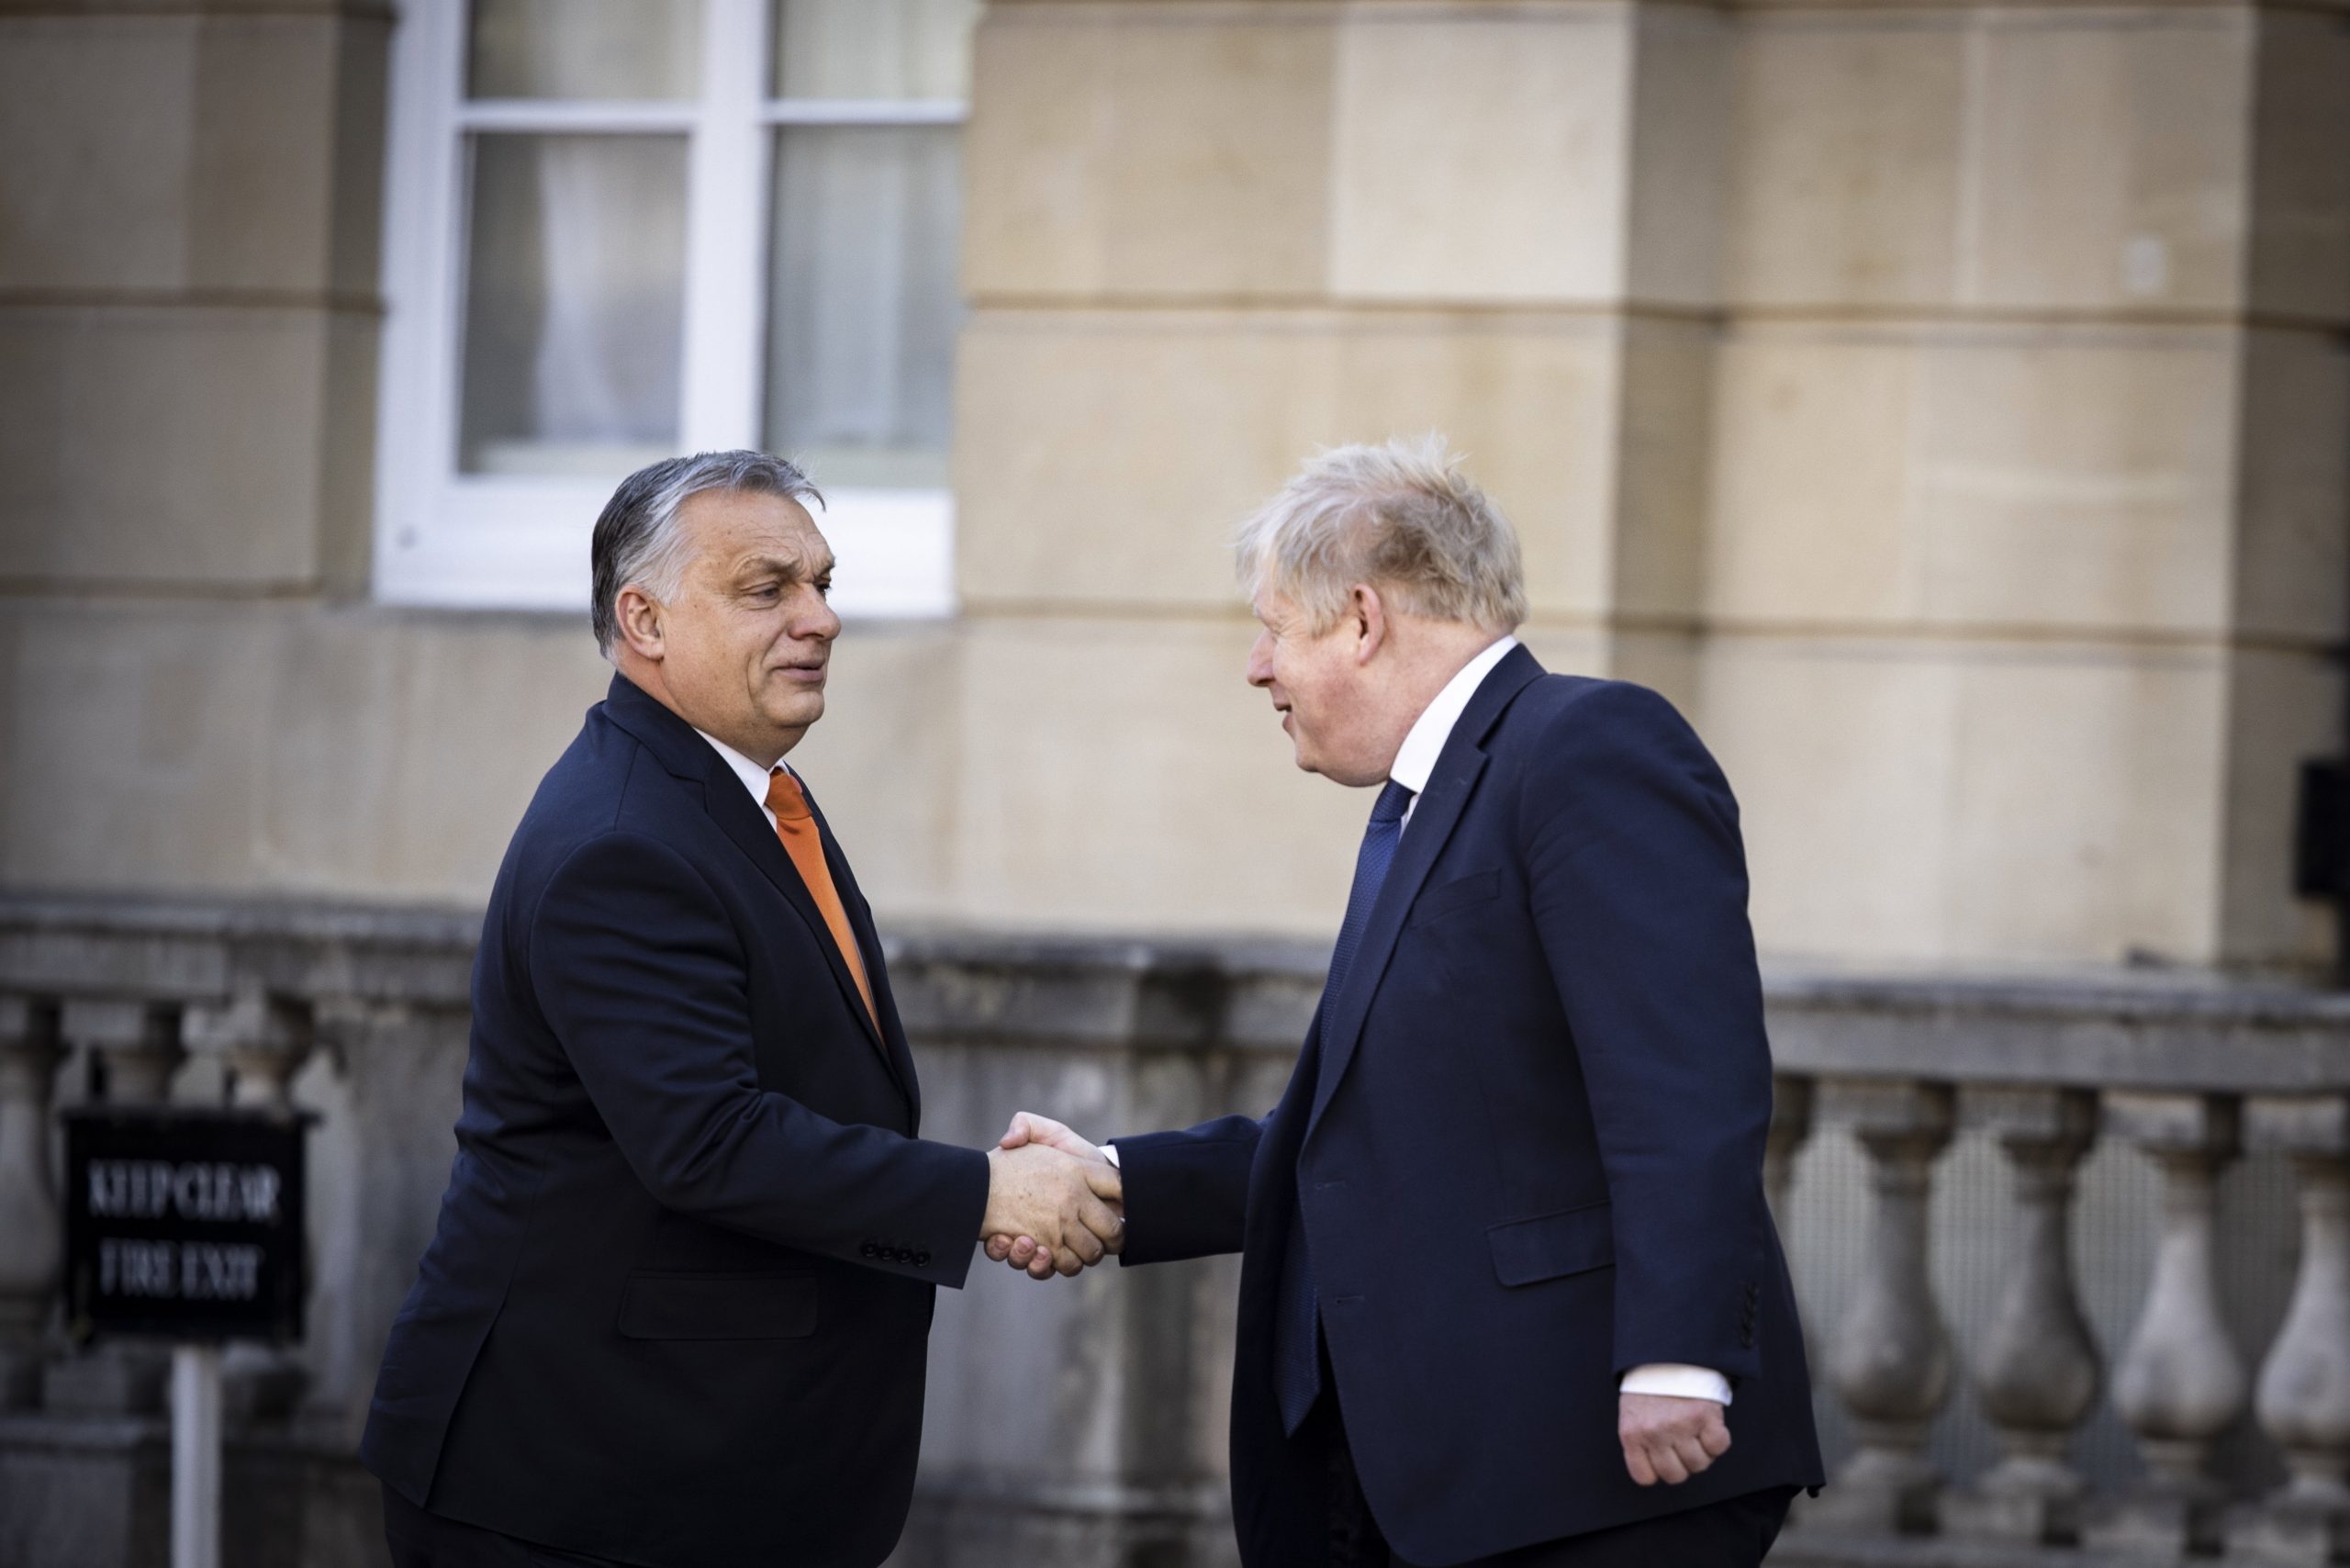 PM Boris Johnson Offers Energy Security Support to PM Orbán